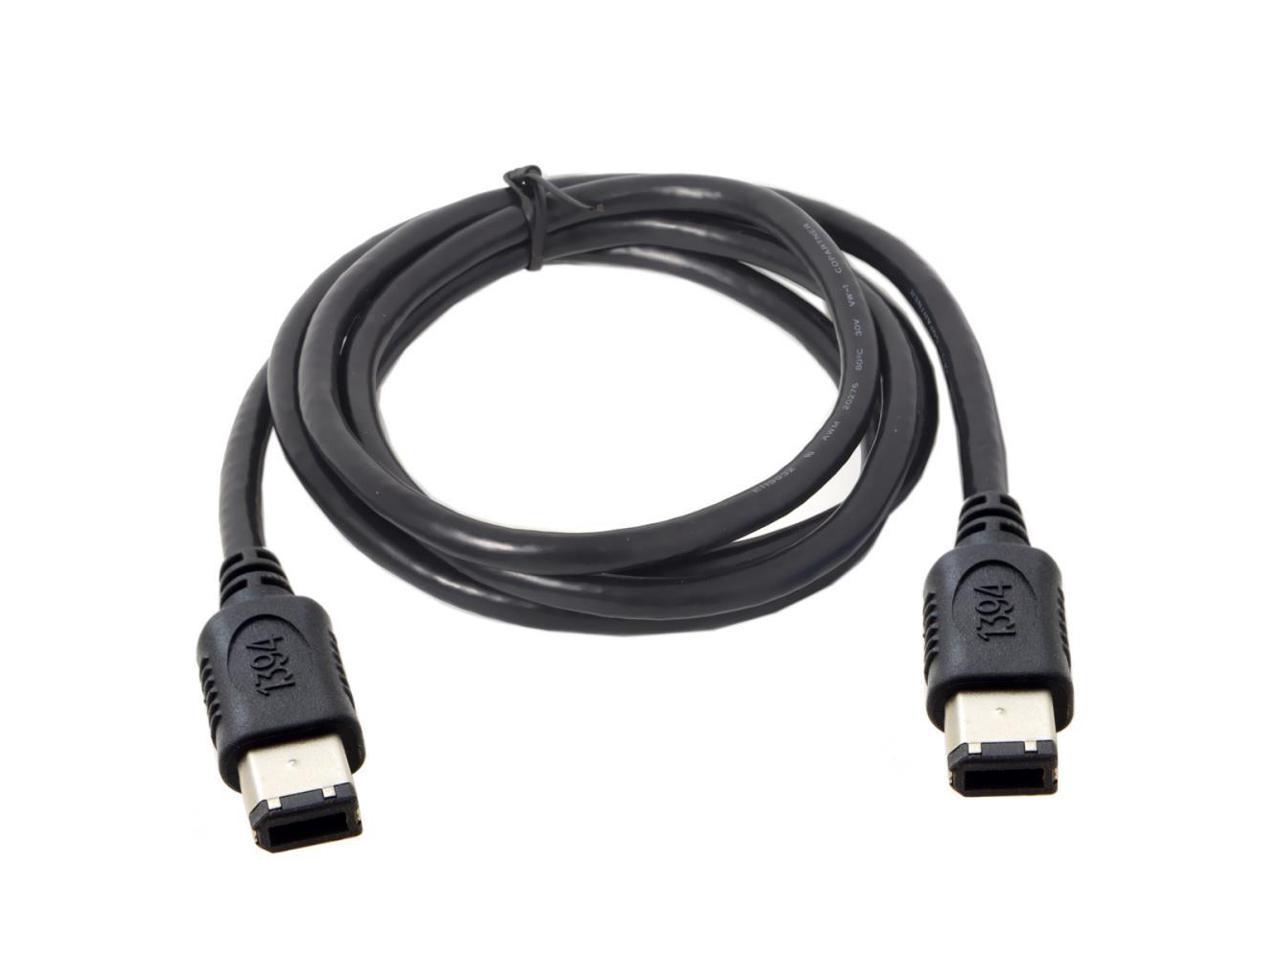 3x 6ft 1.8m USB To Firewire IEEE 1394 4 Pin iLink Adapter Data Cable New 